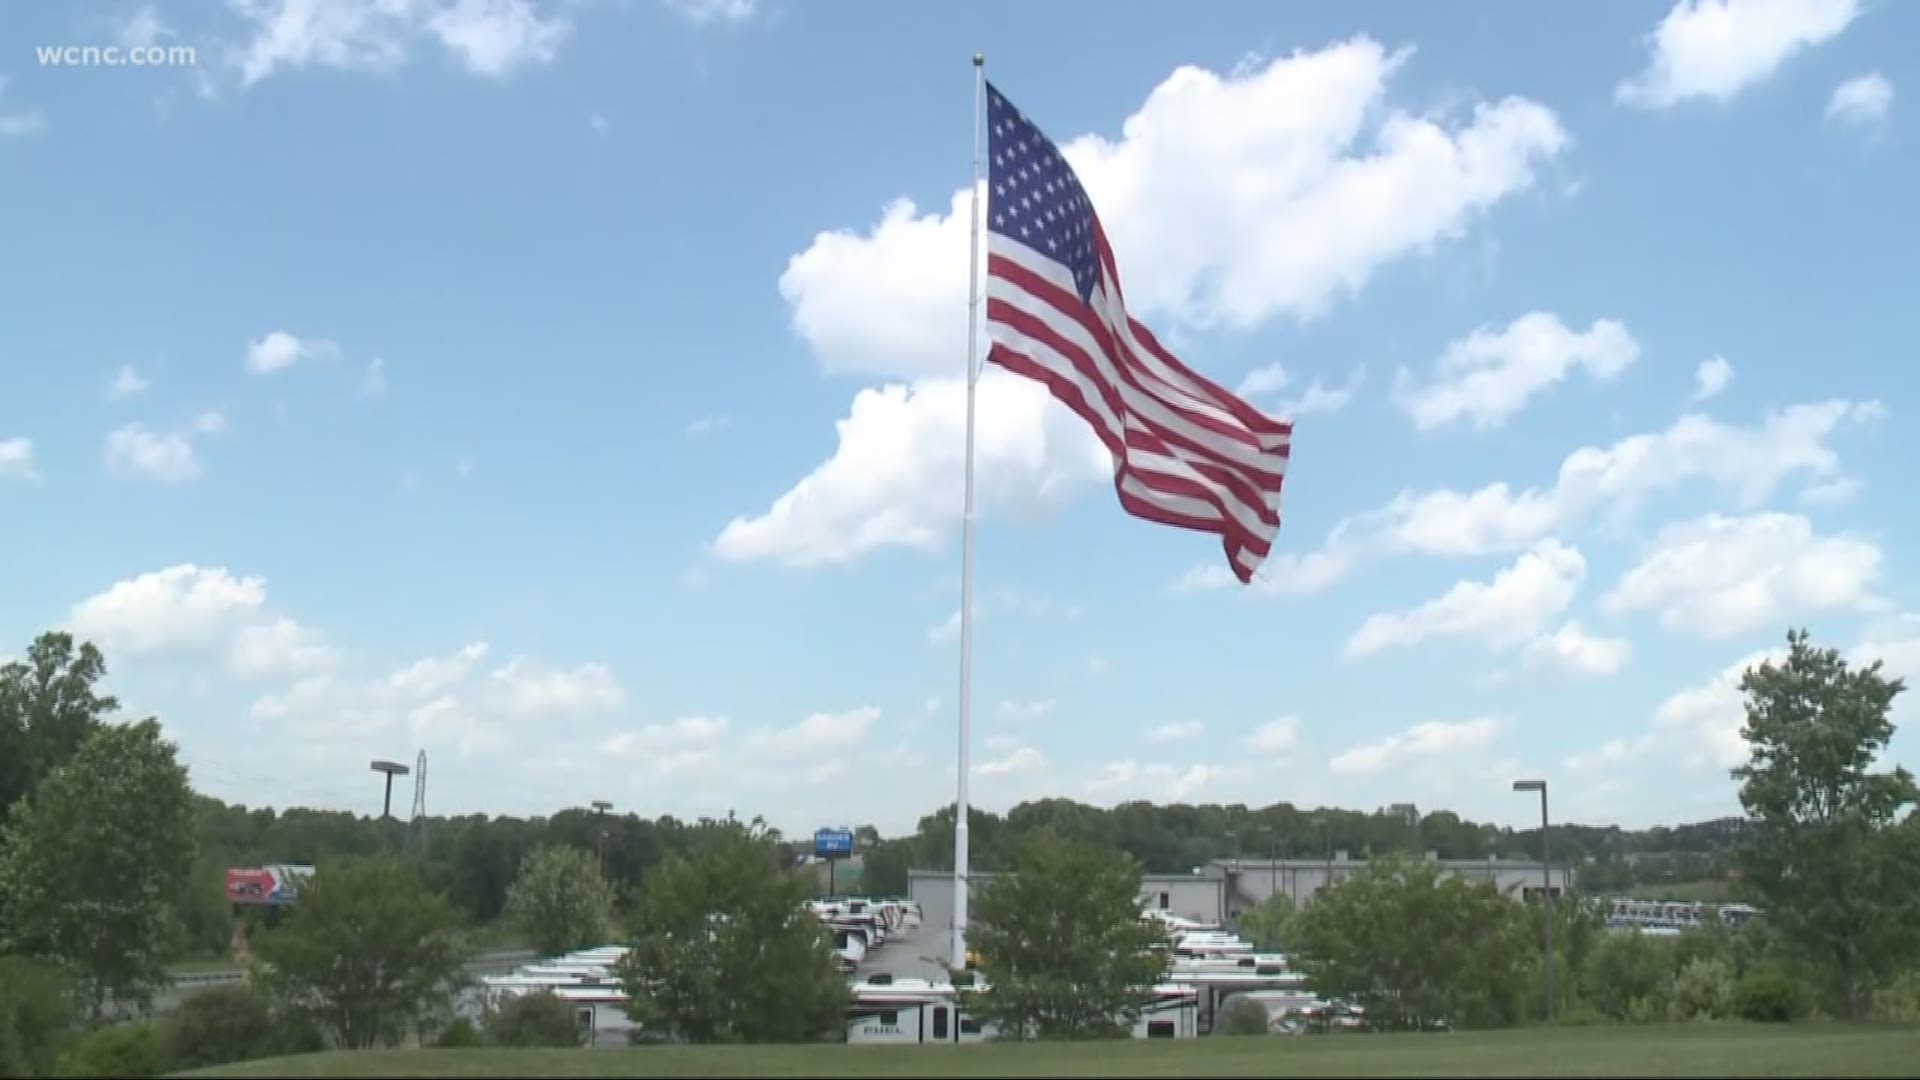 CEO of company flying massive flag in Statesville says he will not back down